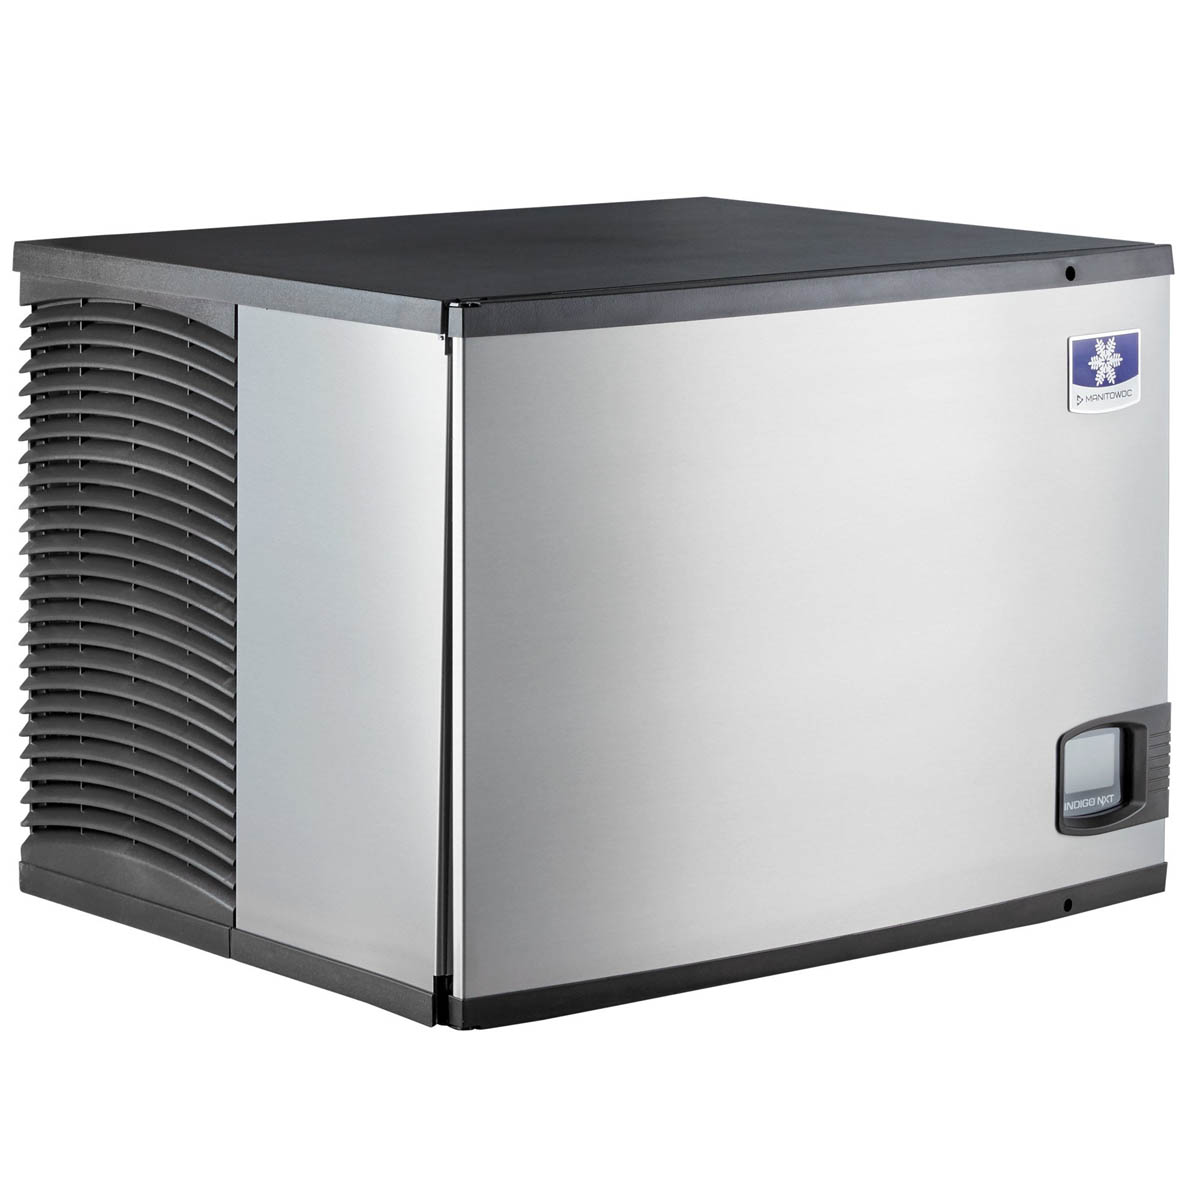 Manitowoc IDT0750A 30″ Cube-Style Indigo Nxt™ Series Ice Maker, Air-Cooled, 680 lbs/Day